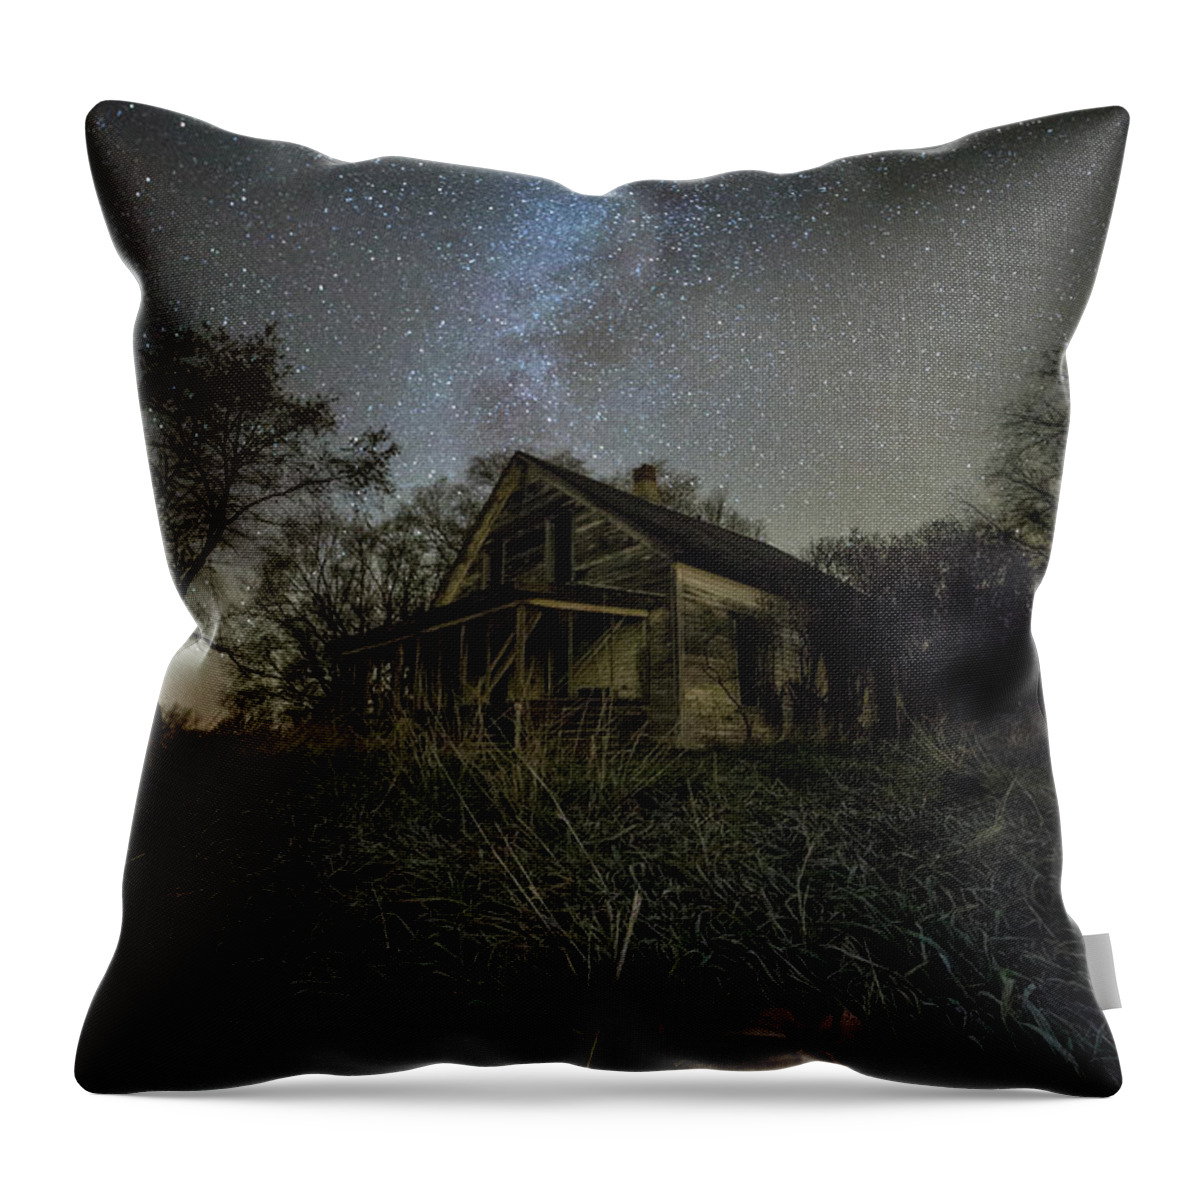 Ky Throw Pillow featuring the photograph Haunted Memories by Aaron J Groen